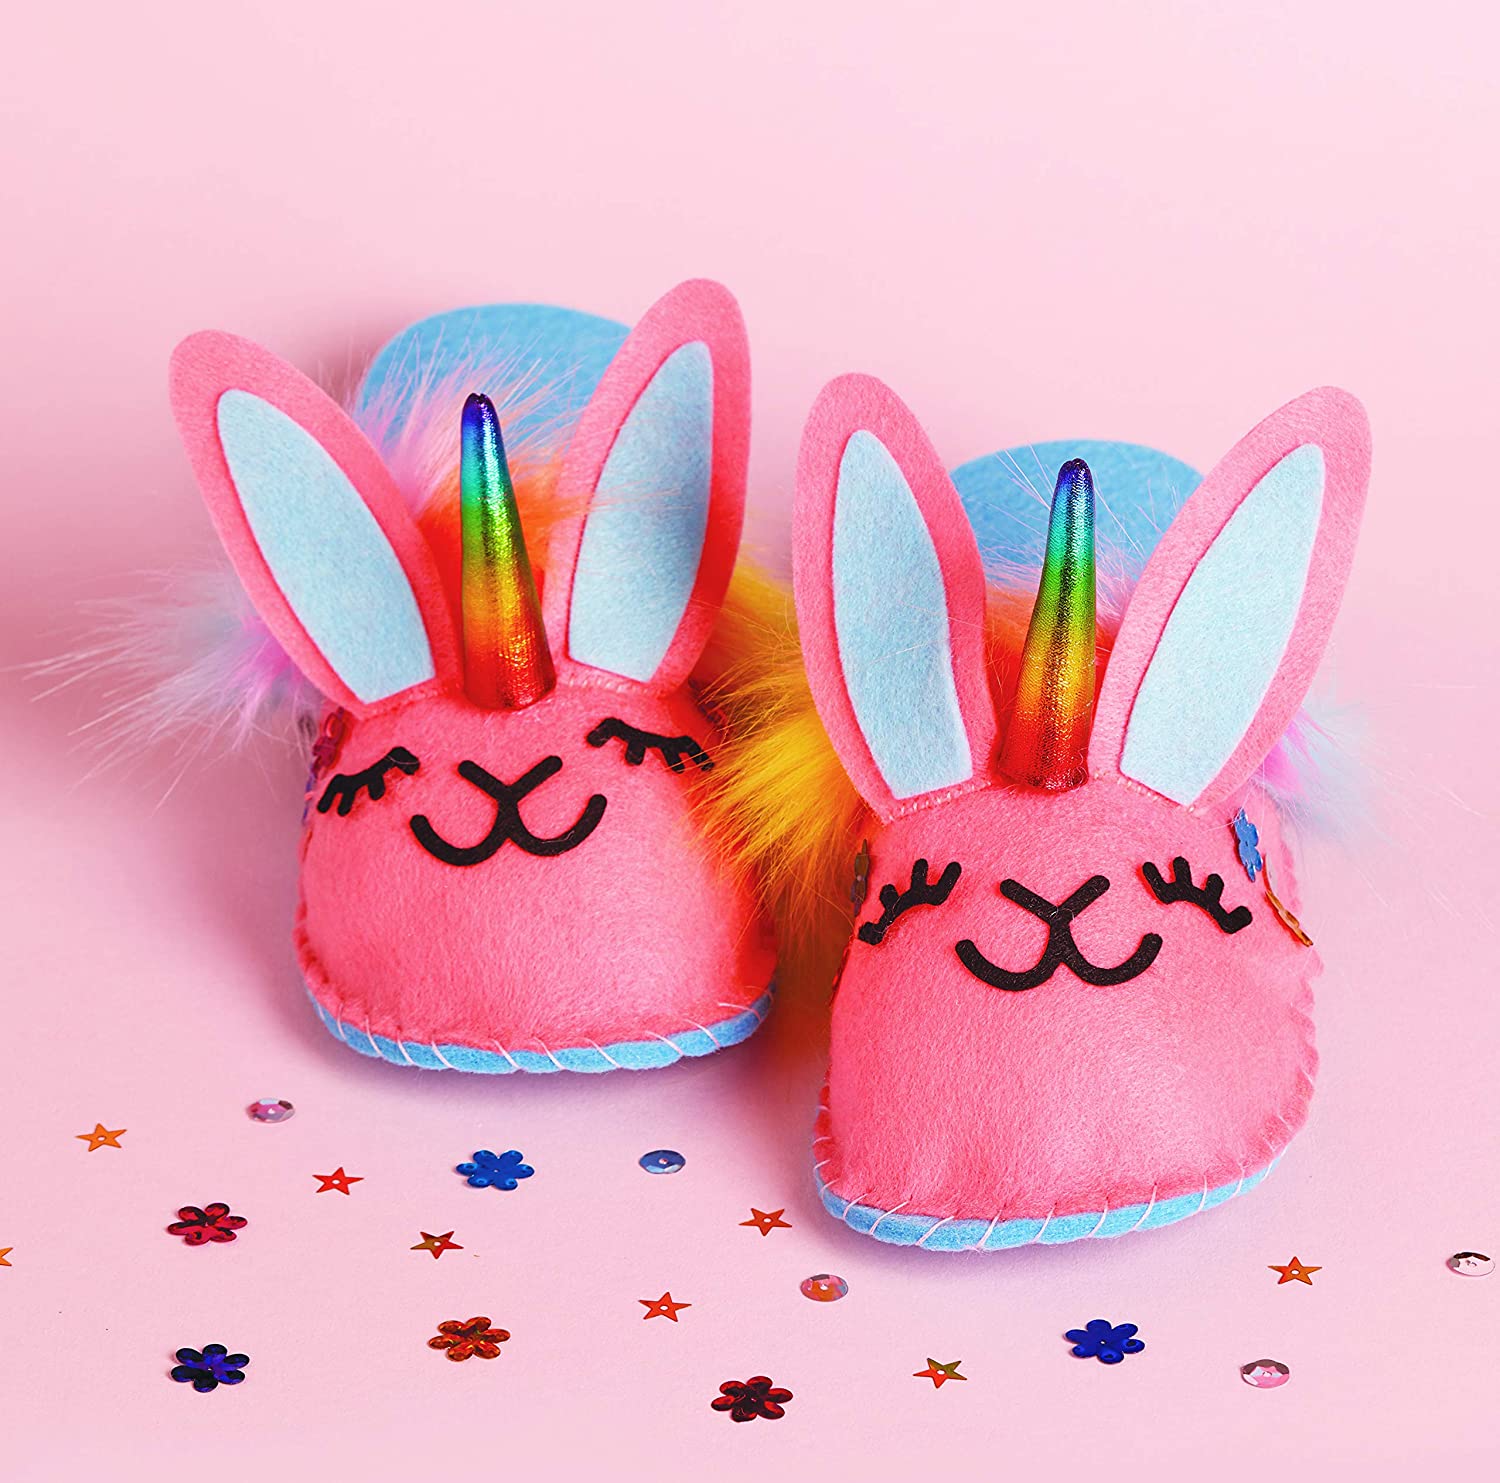 Klutz Sew Your Own Unicorn Bunny Slippers Craft Kit - image 2 of 3